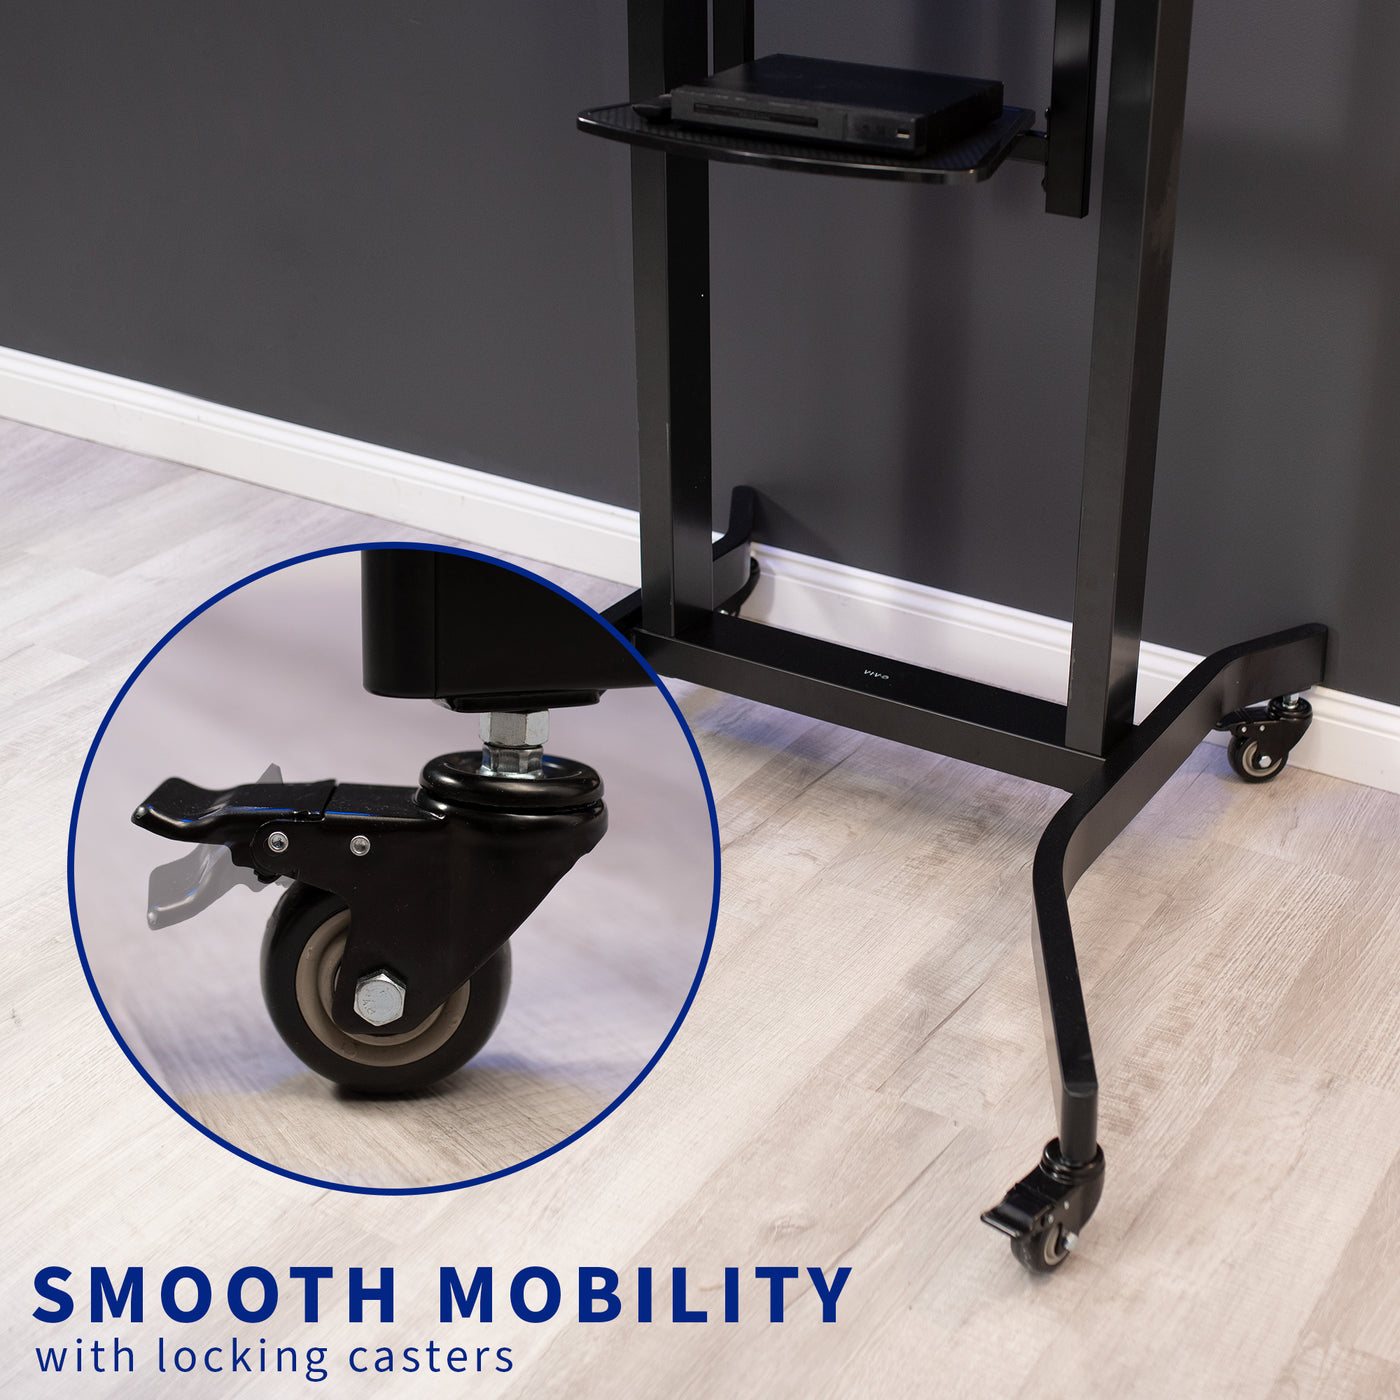 Smooth gliding caster wheels allow for mobility. 